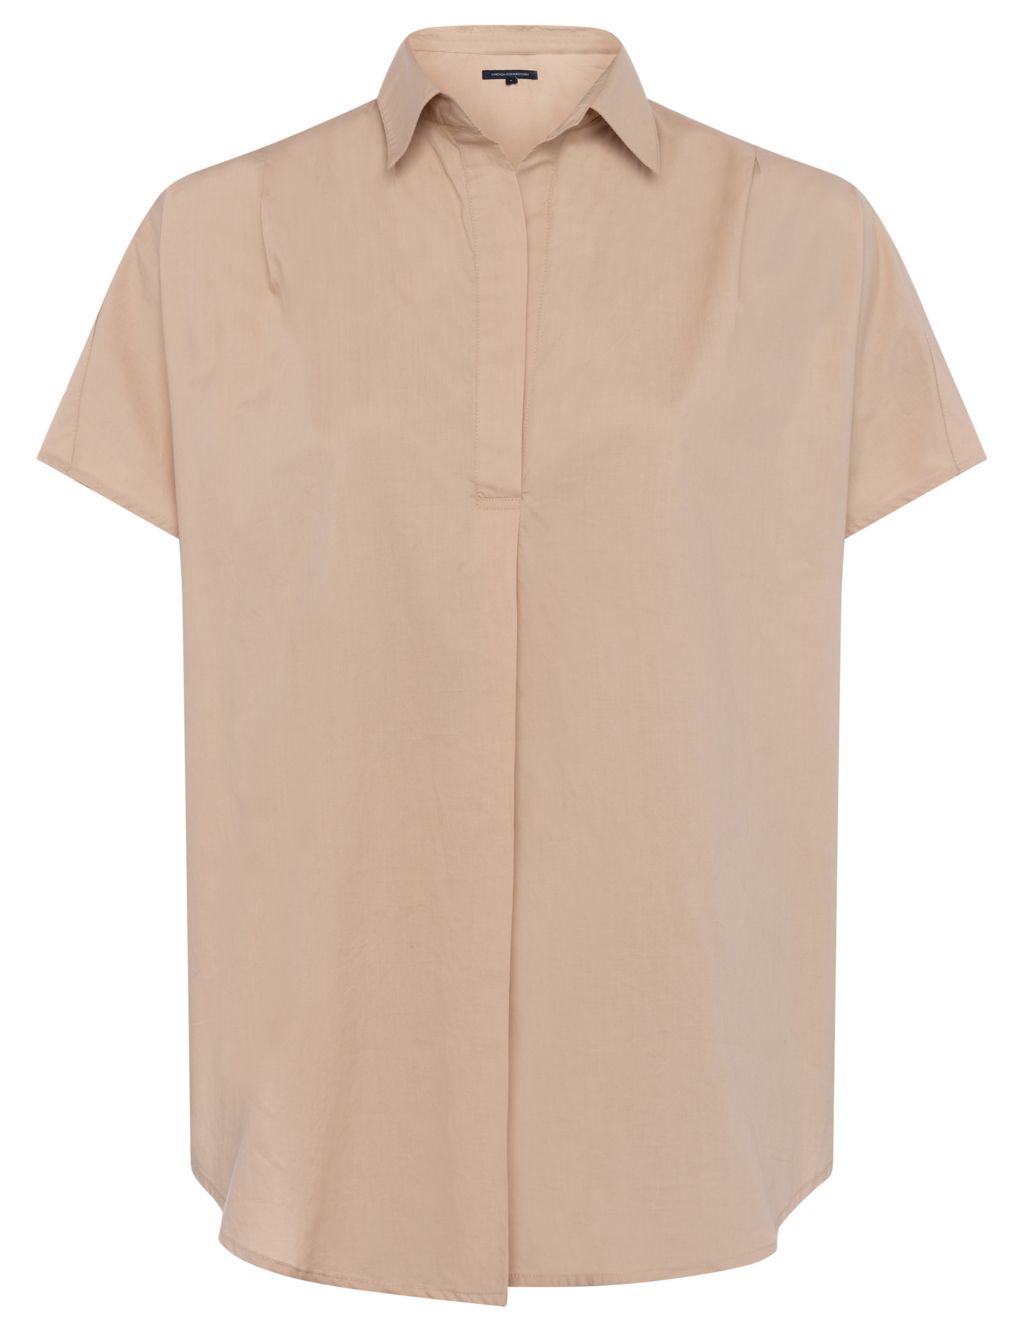 Pure Cotton Collared Short Sleeve Shirt image 2